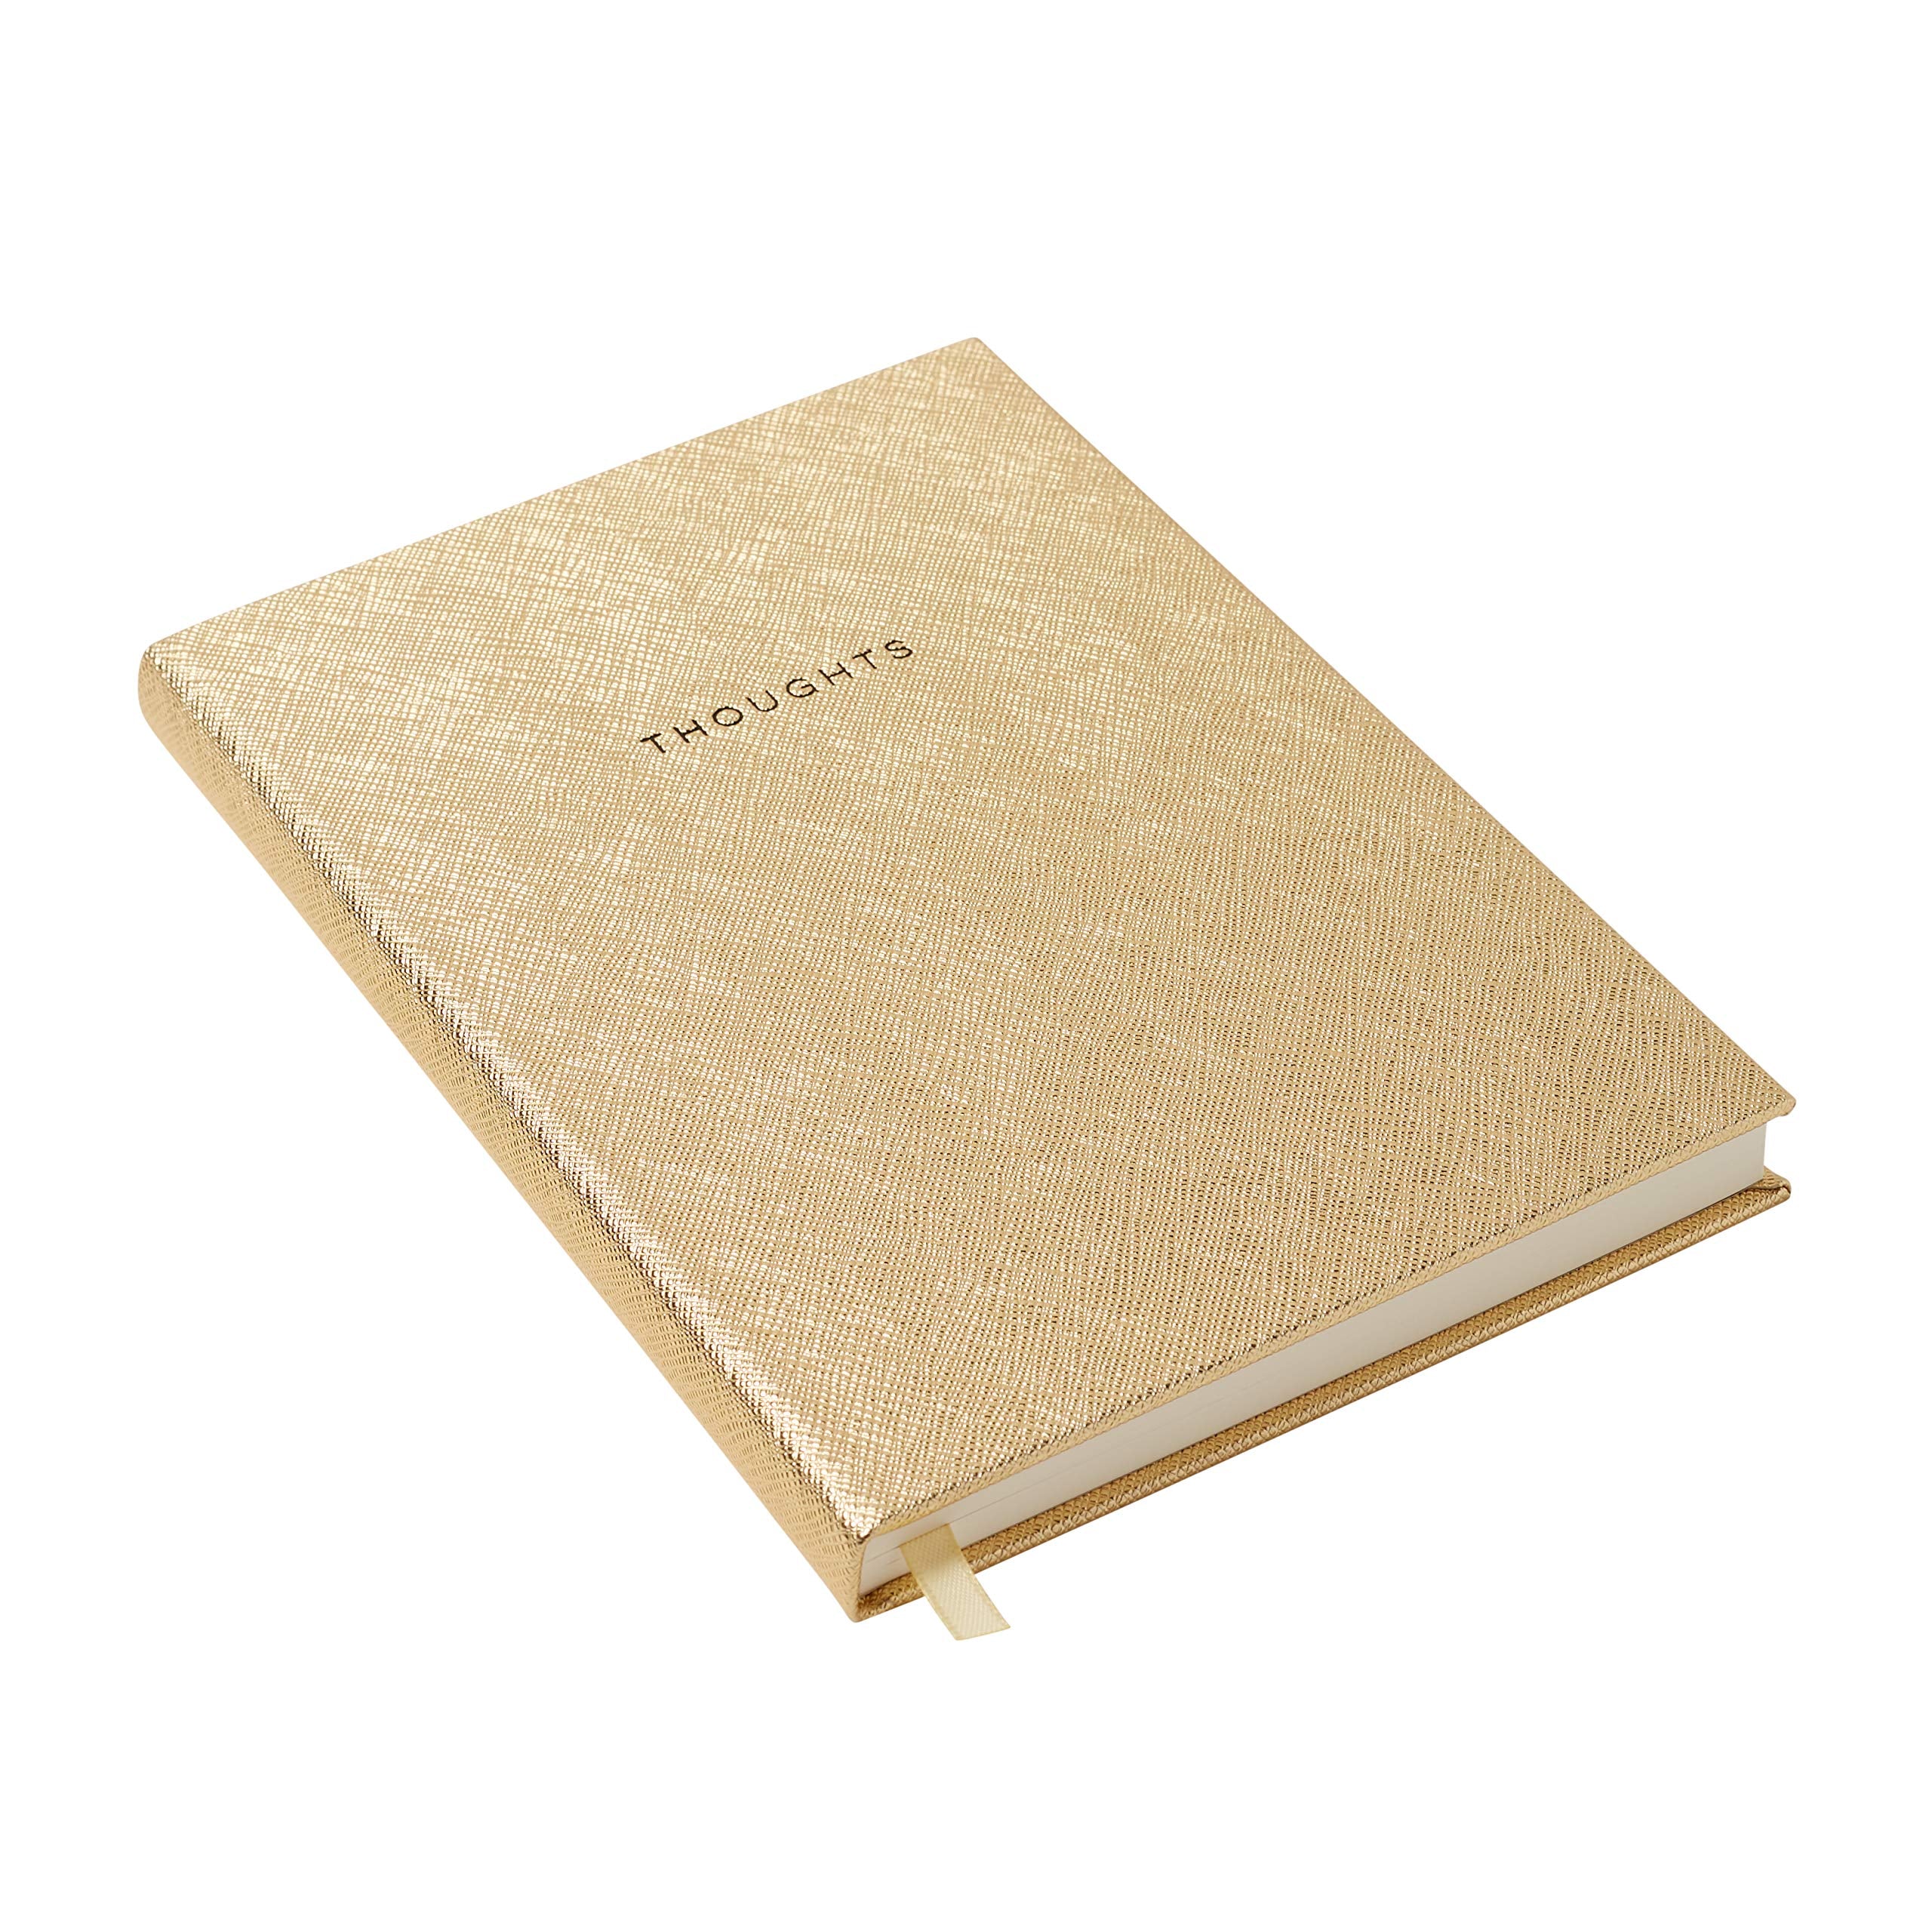 Medium Sized Eccolo Lined Journal Notebook with 256 Ruled Pages